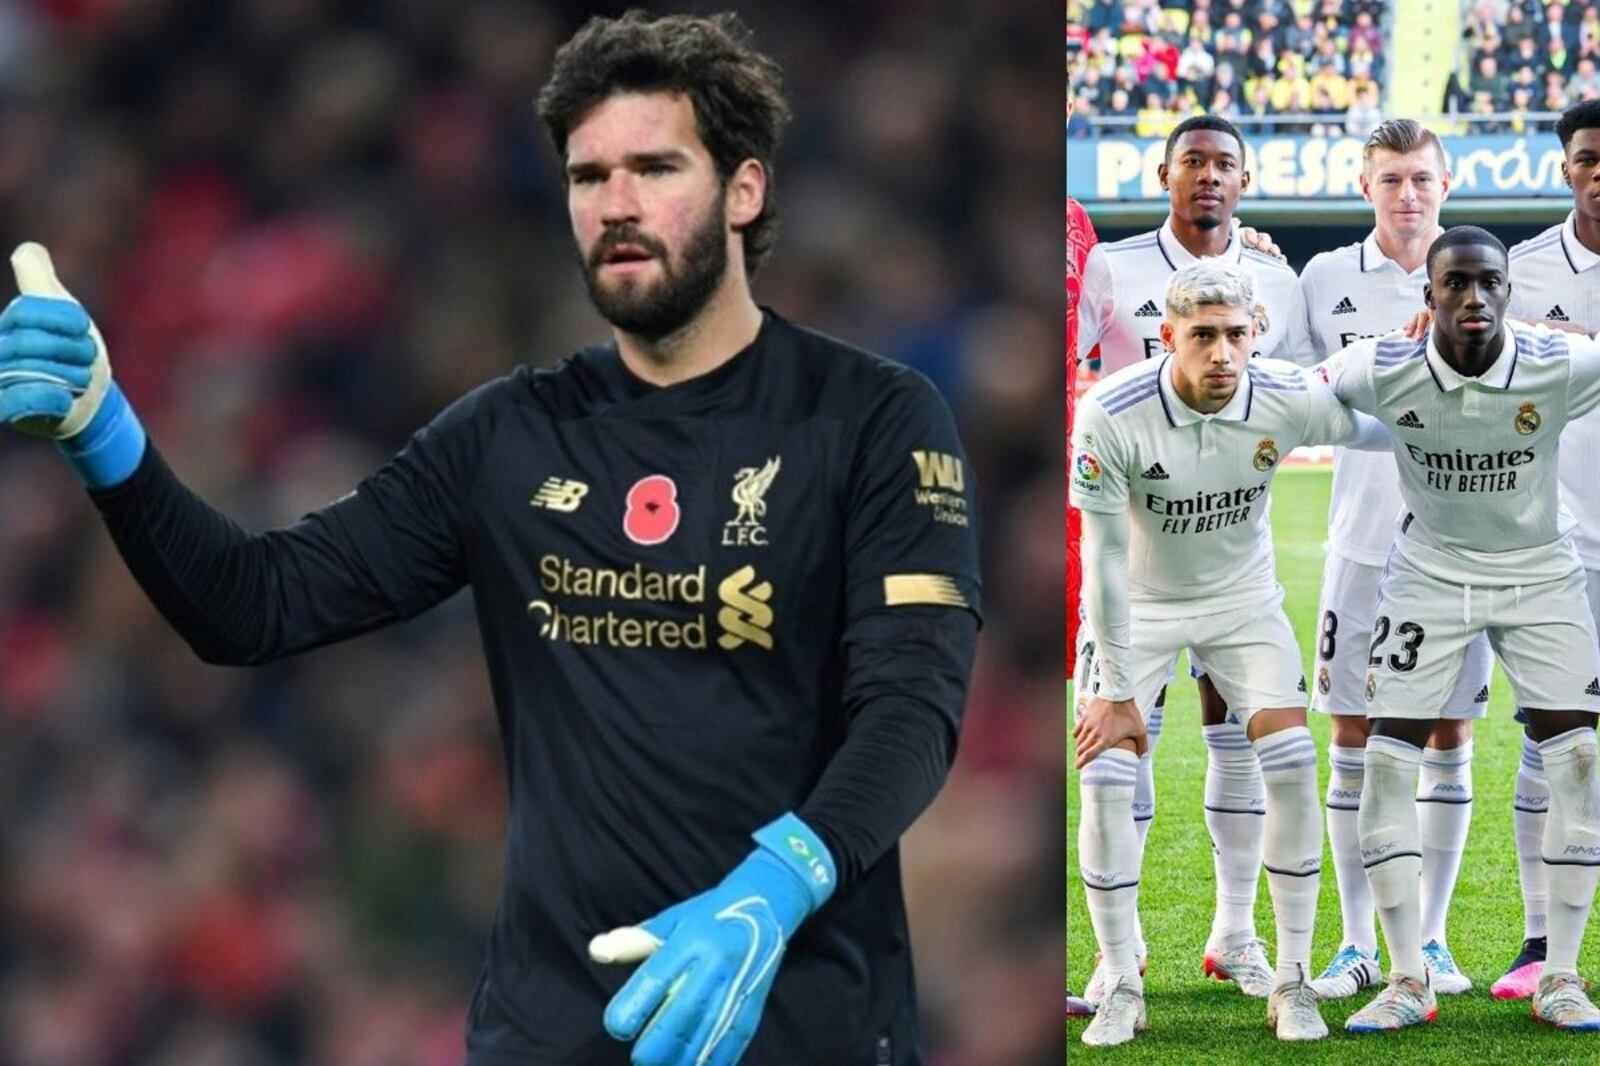 The new value of Alisson Becker after his great game against Real Madrid